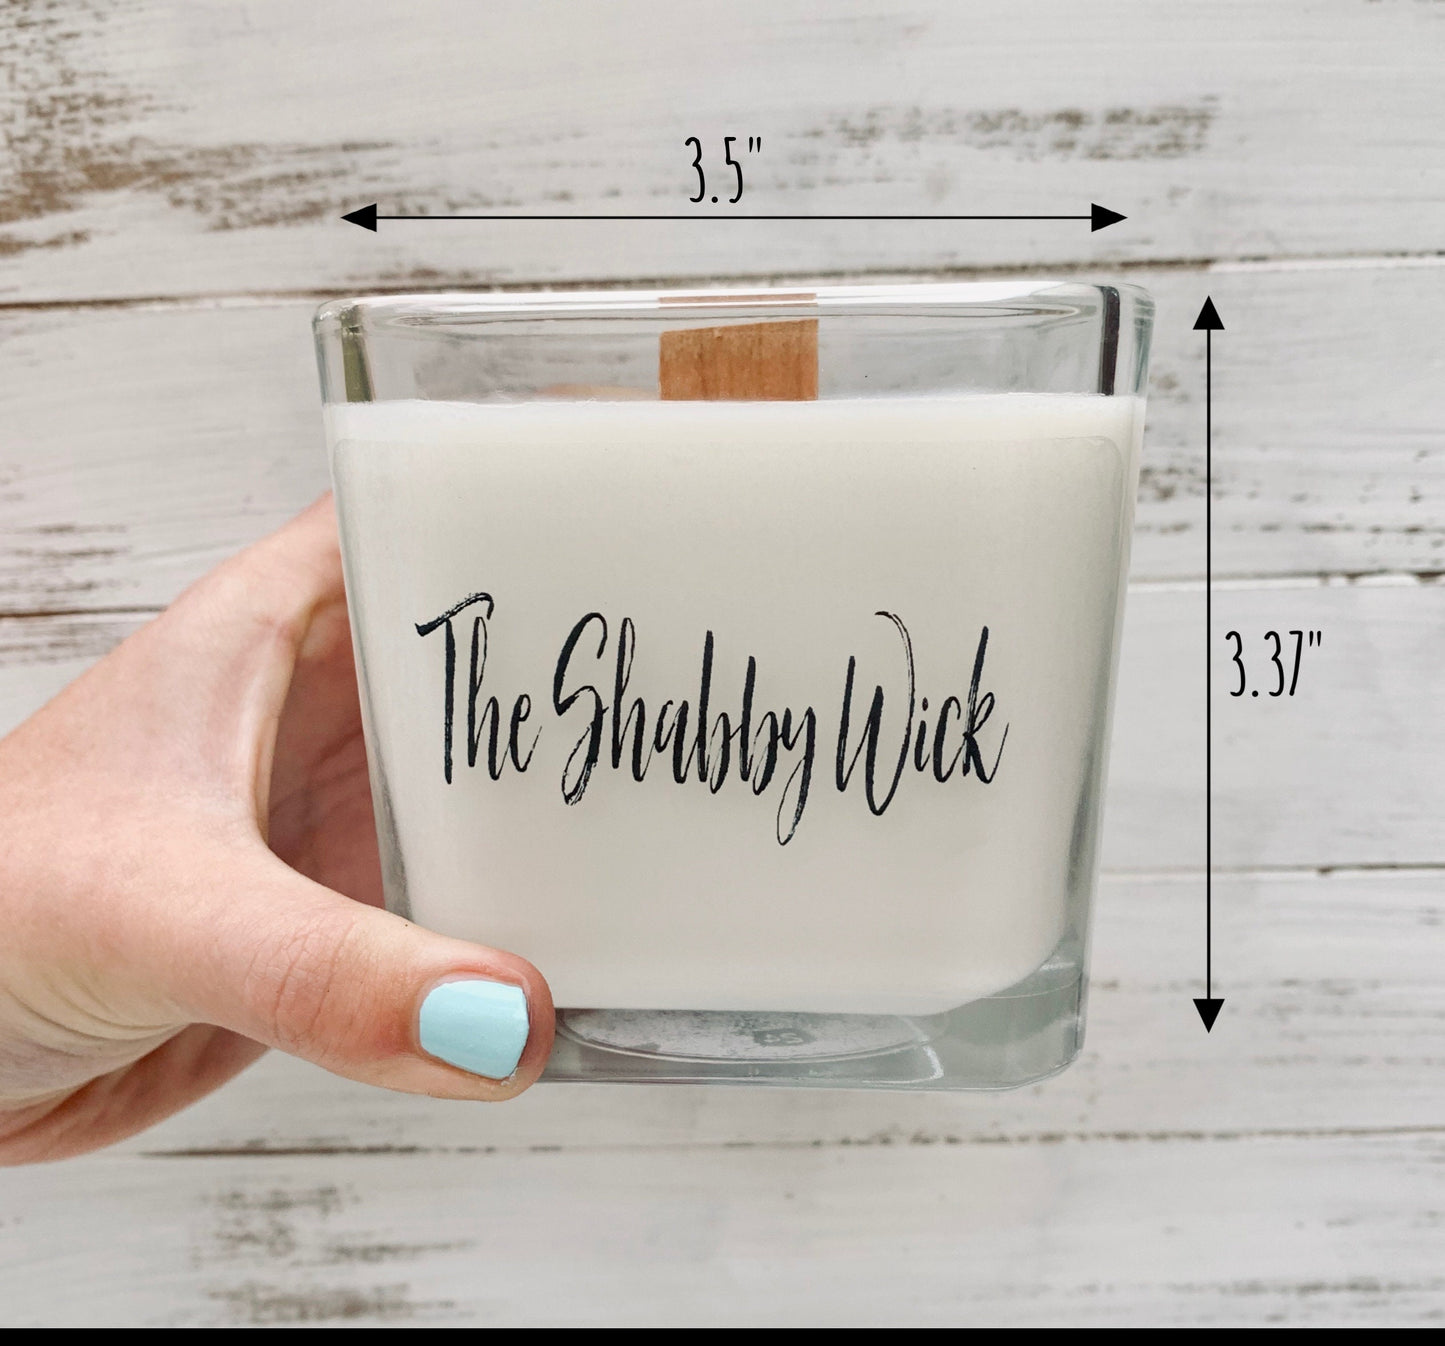 Groom Gift Groom Candle Groom To Be Gifts For Groom In Wedding Day Groom Engagement Gift Engagement - TheShabbyWick